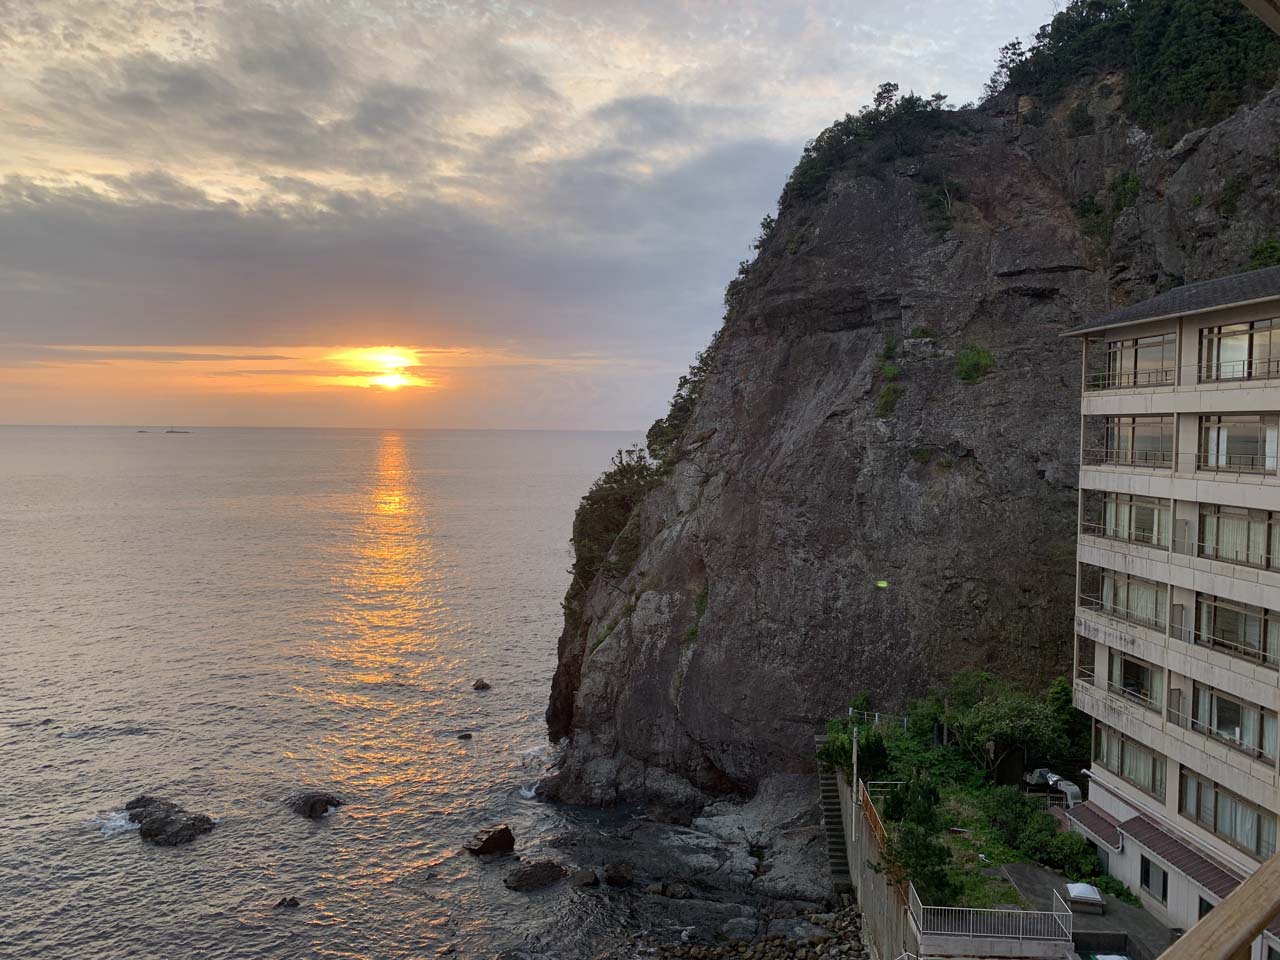 Sunrise as seen from our room at the Hotel Urashima in Japan, which was an unforgettable stay due to the property's size, the off-the-beaten-path location, and its many onsens